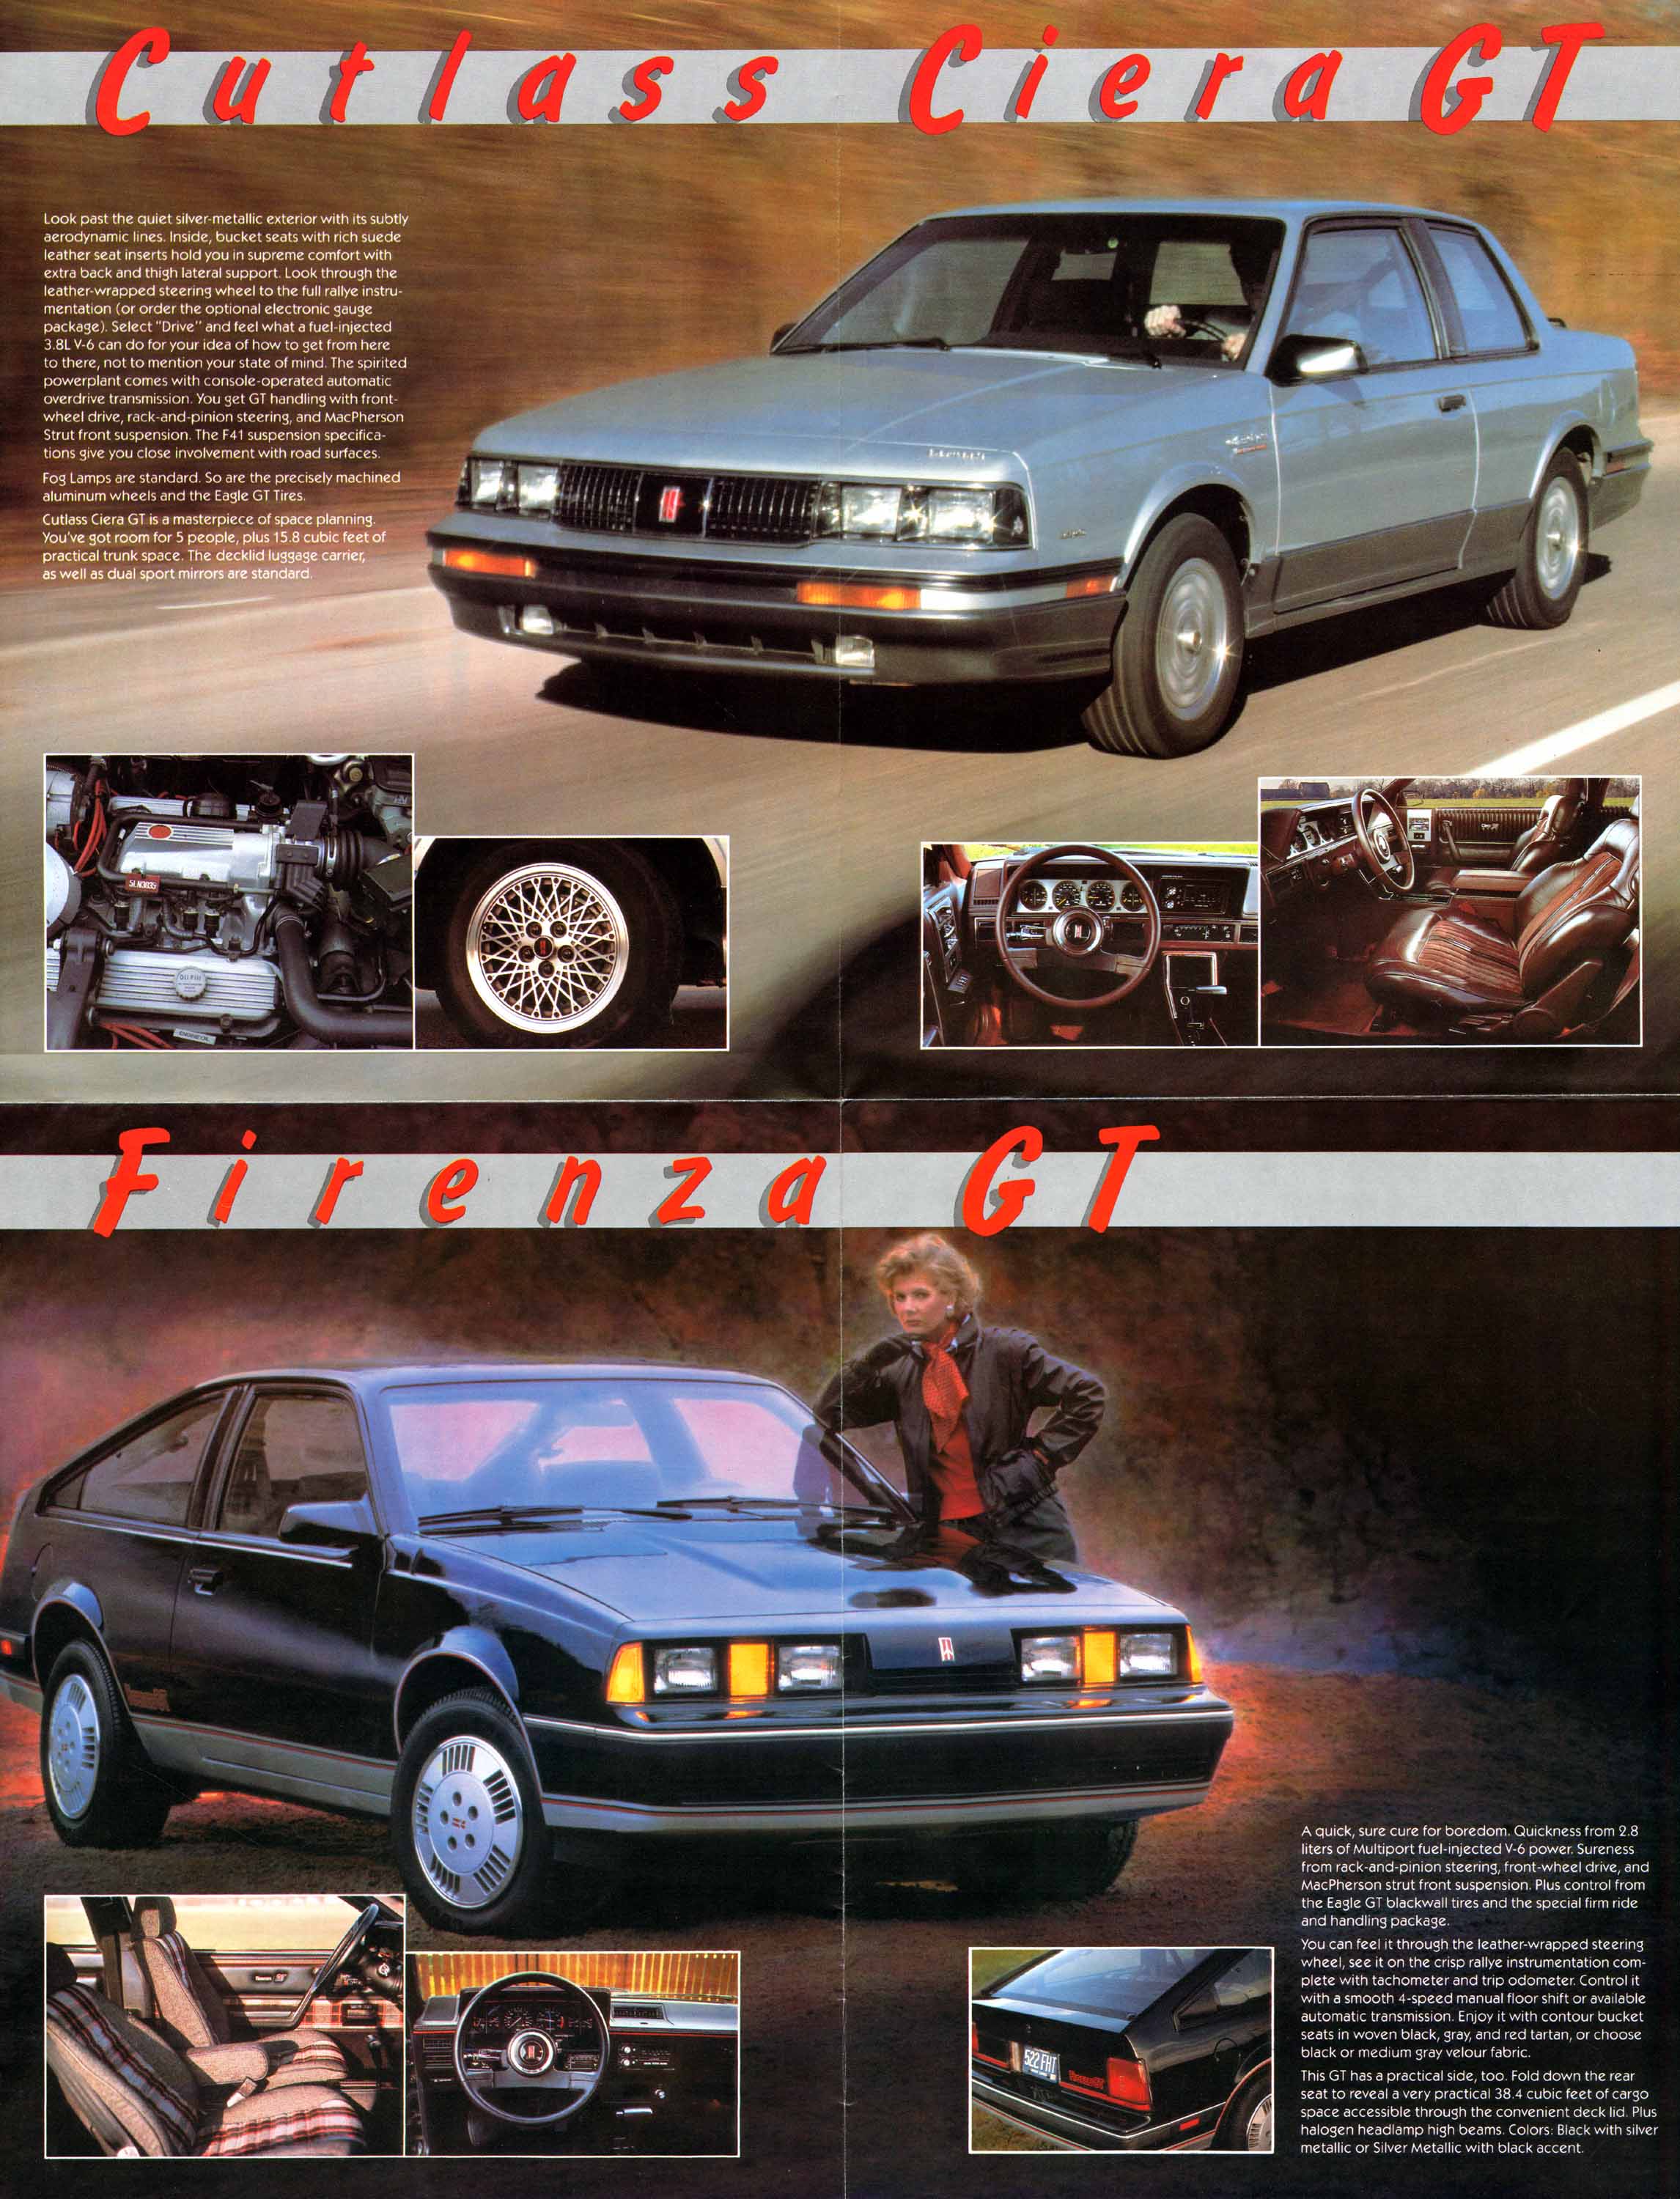 1985 Oldsmobile Three for the Road-04-05-06-07